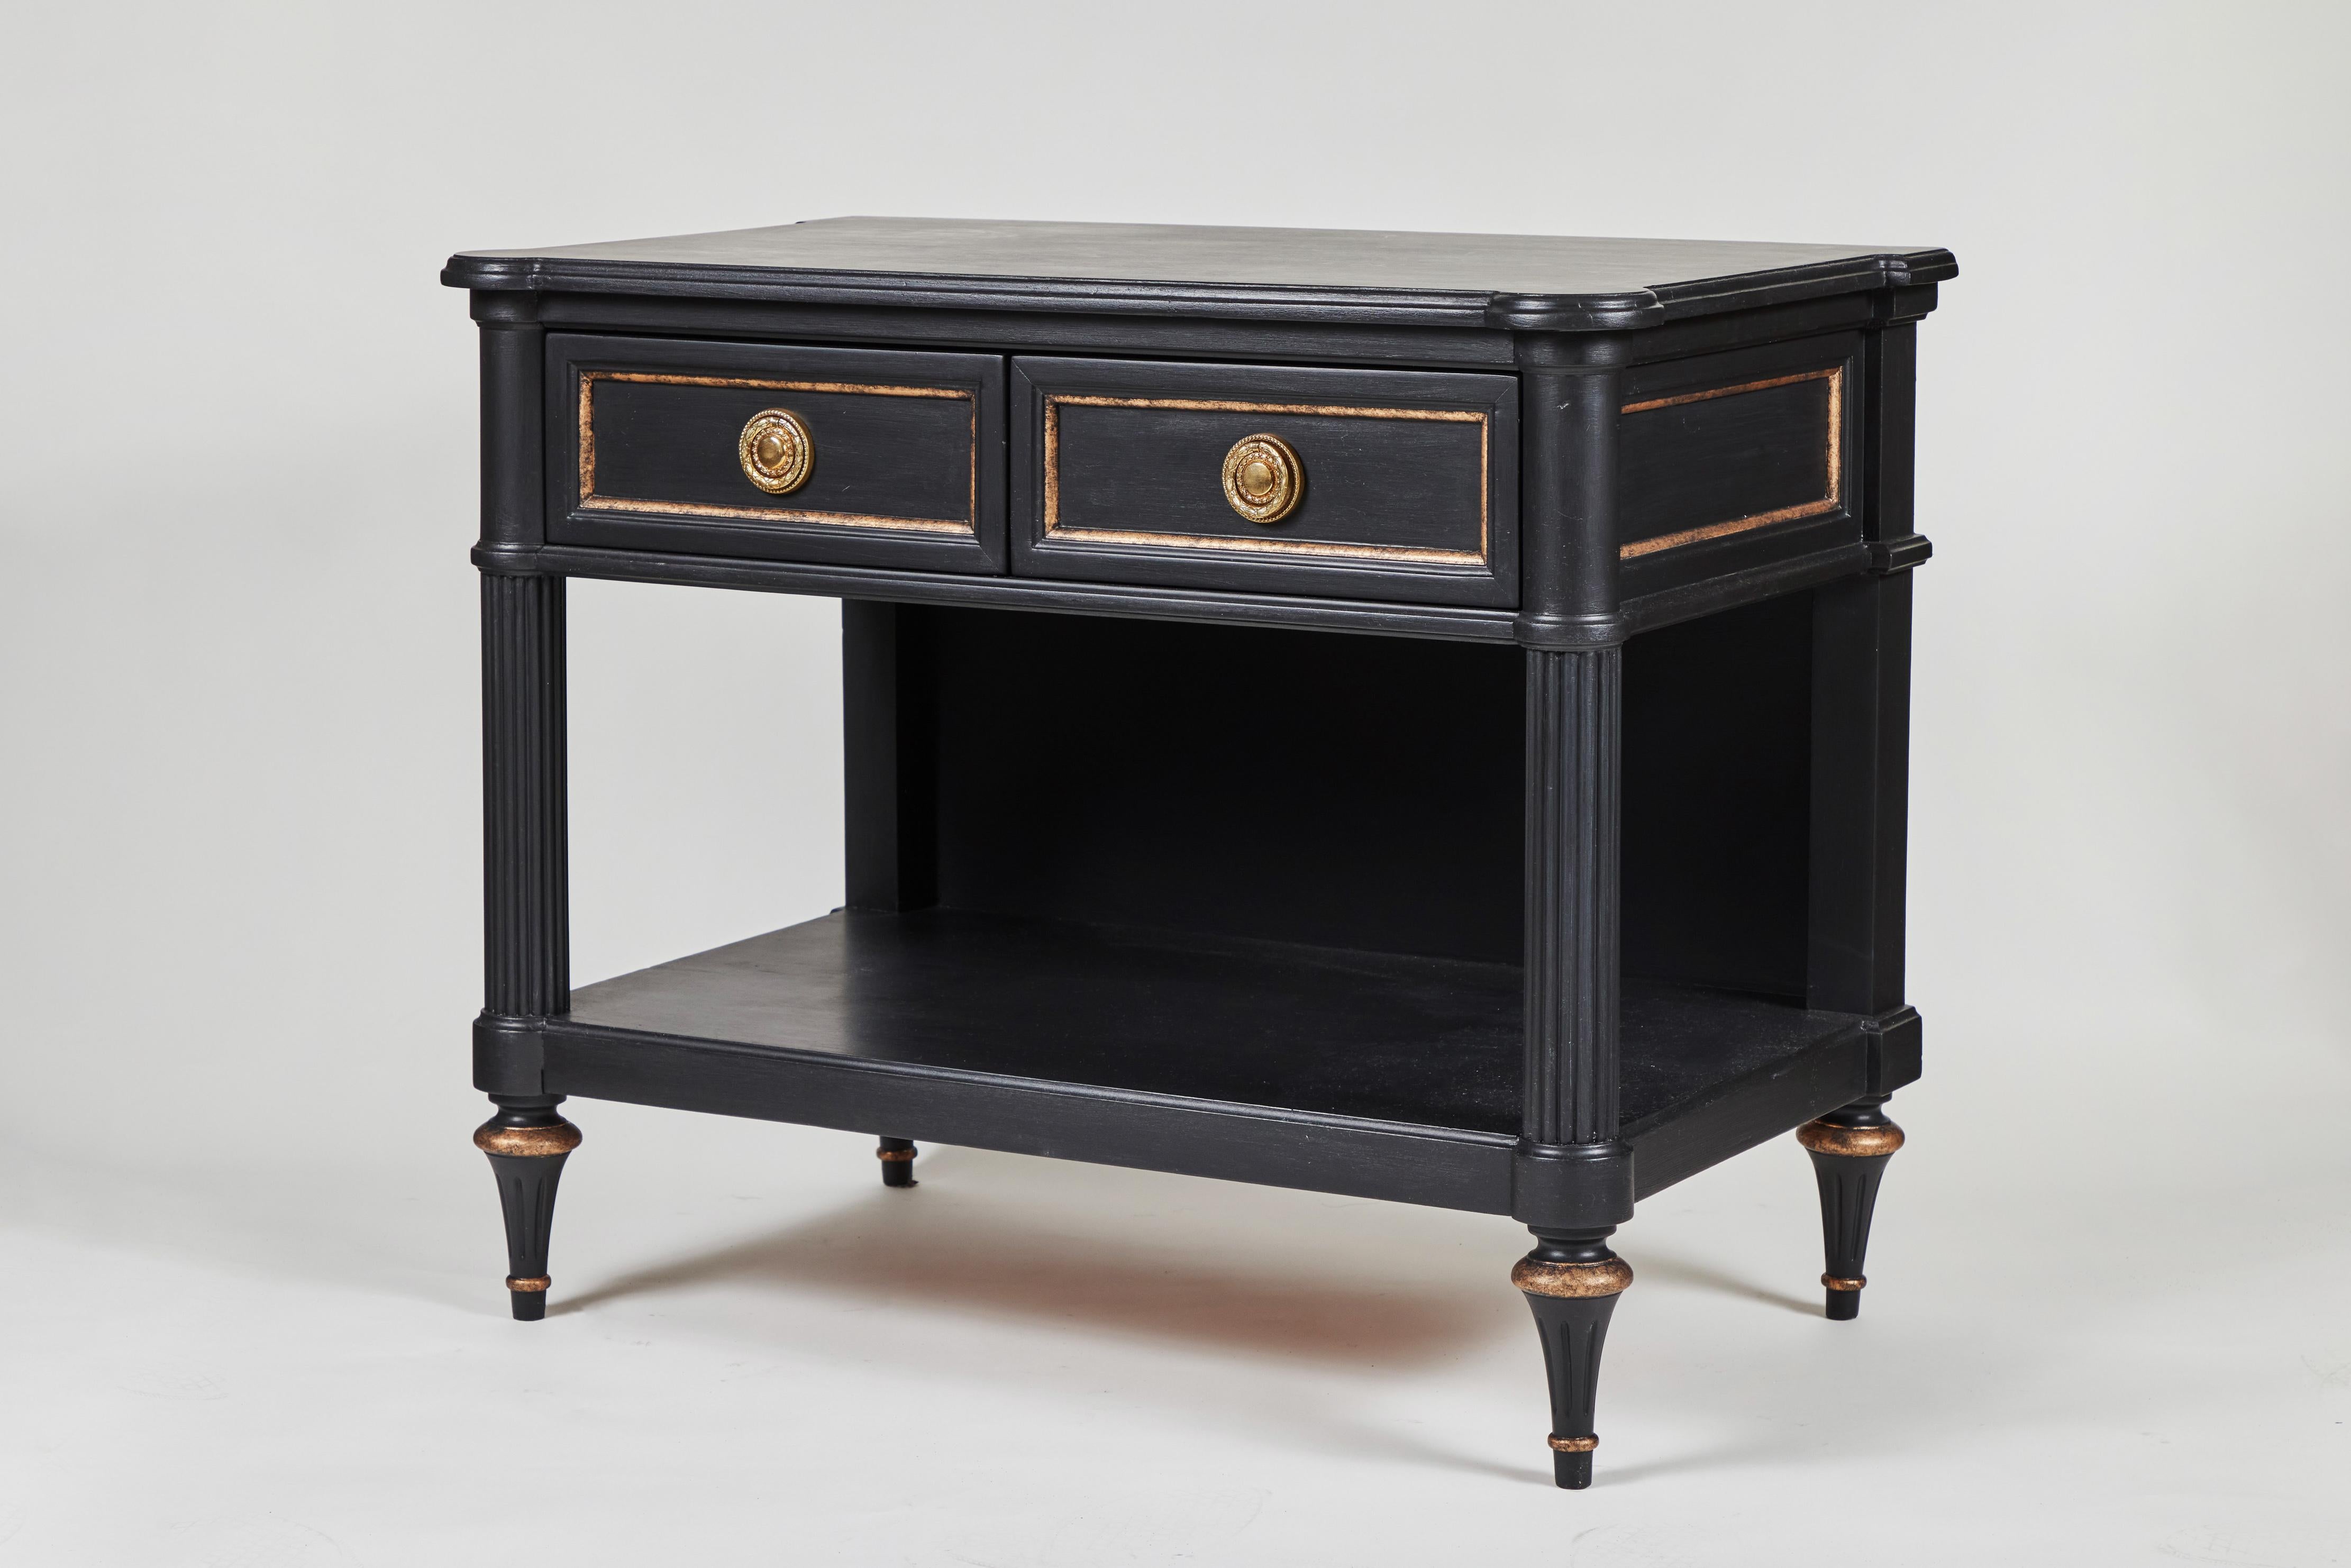 This vintage 2-drawer side table with bottom shelf has been newly painted in matte black with a detailed distressed gold accent. Bonus: One of the drawers has a hidden lock mechanism. 